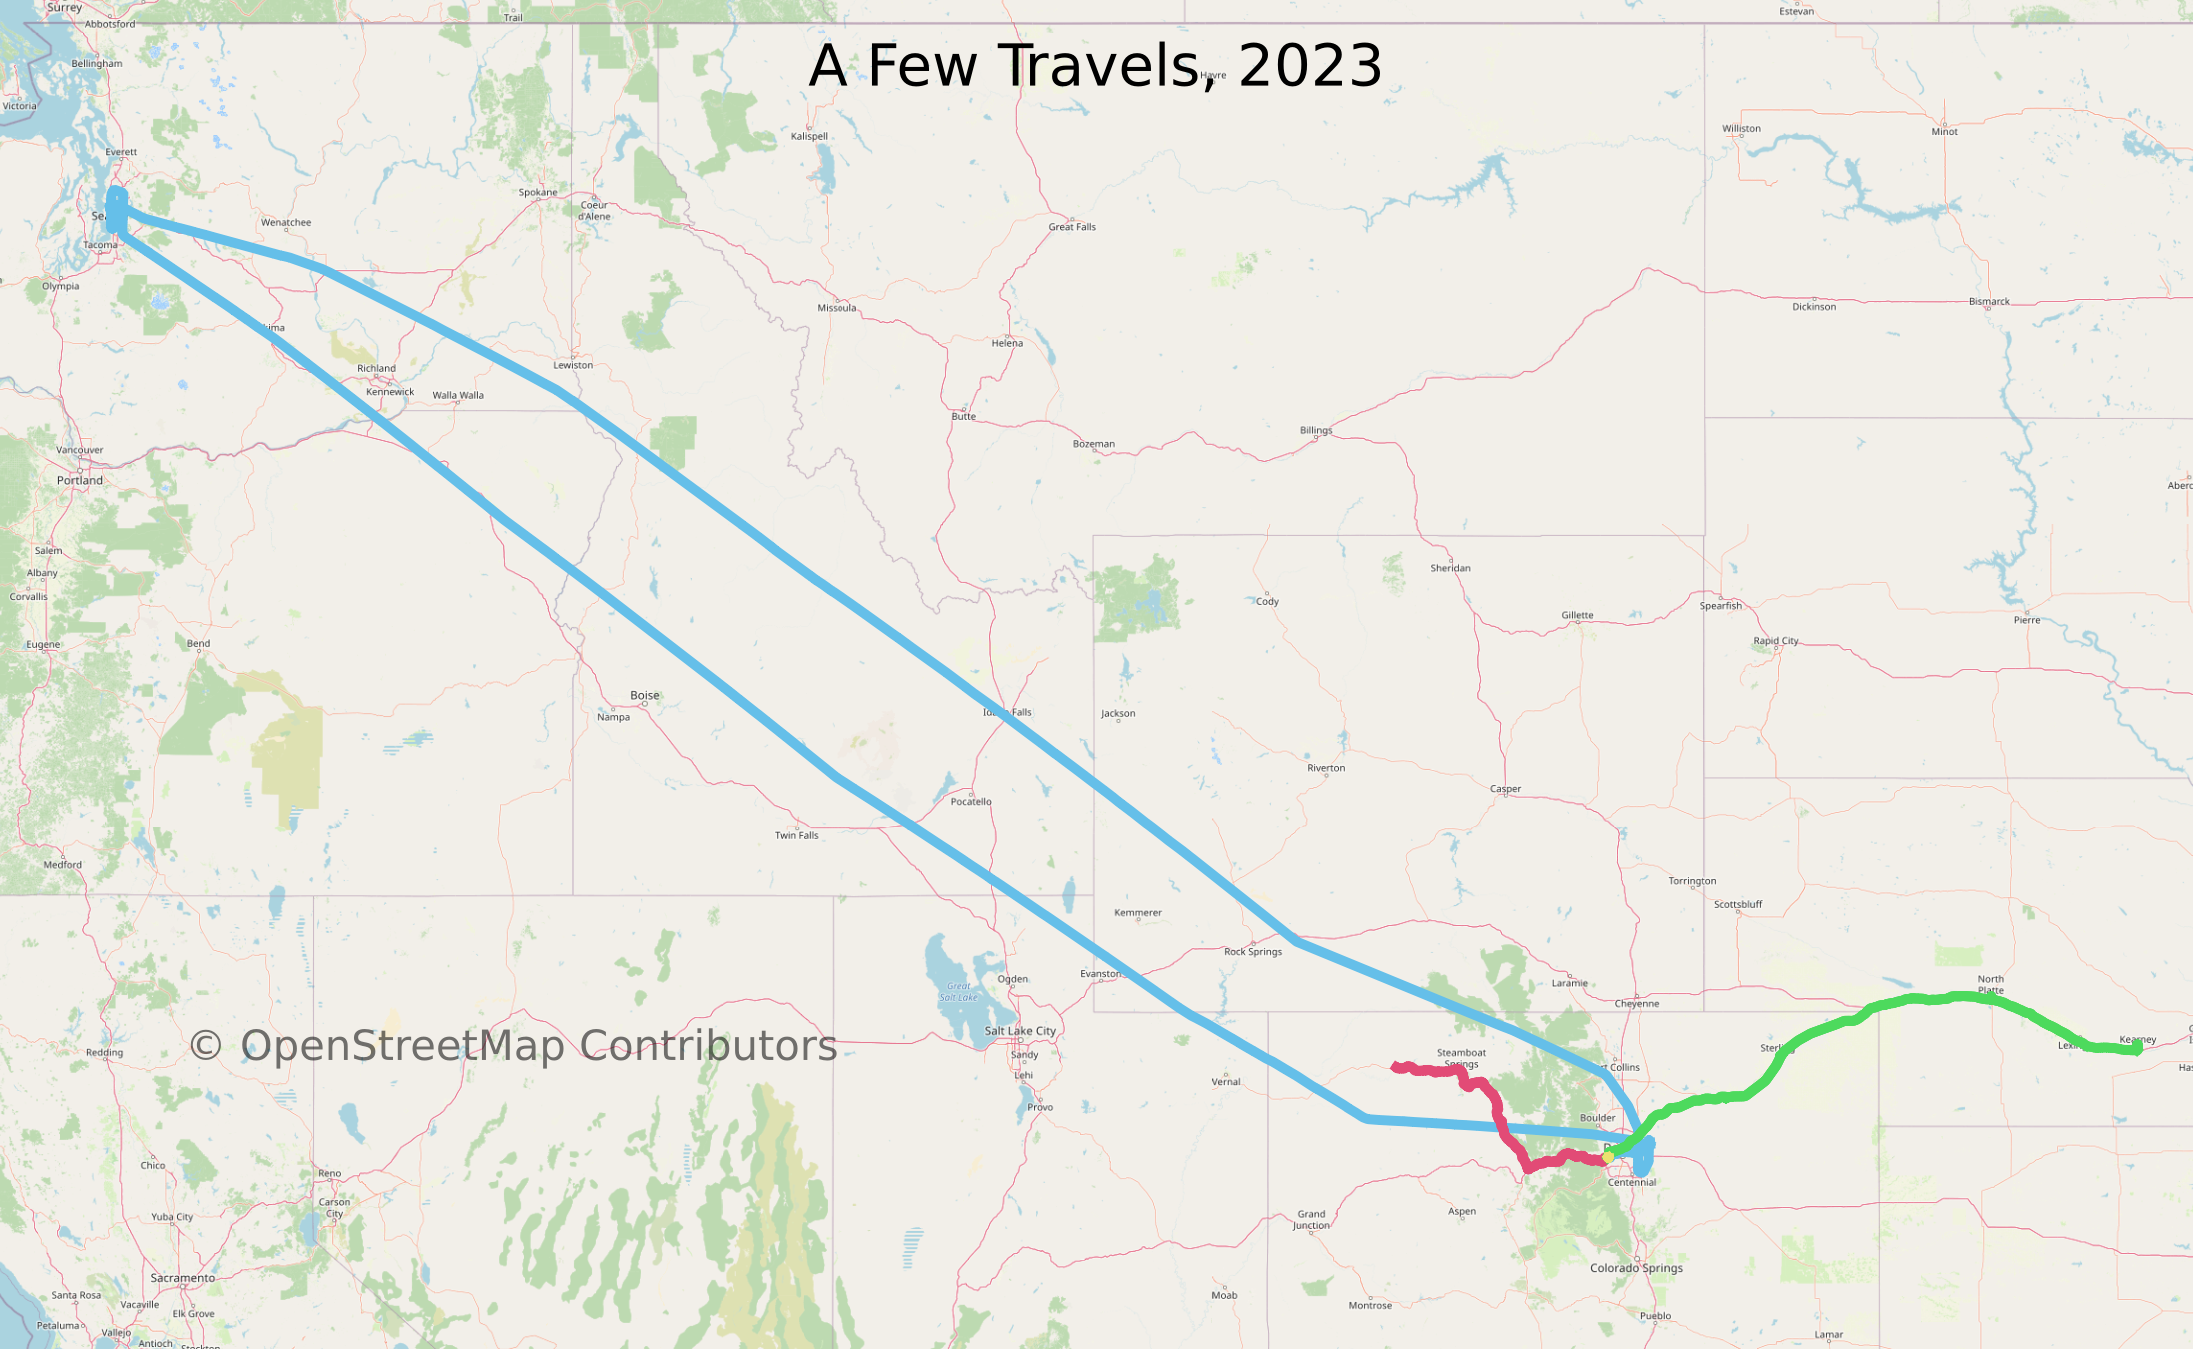 Image of a map showing flights to/from Seattle, to Nebraska, and around Colorado.